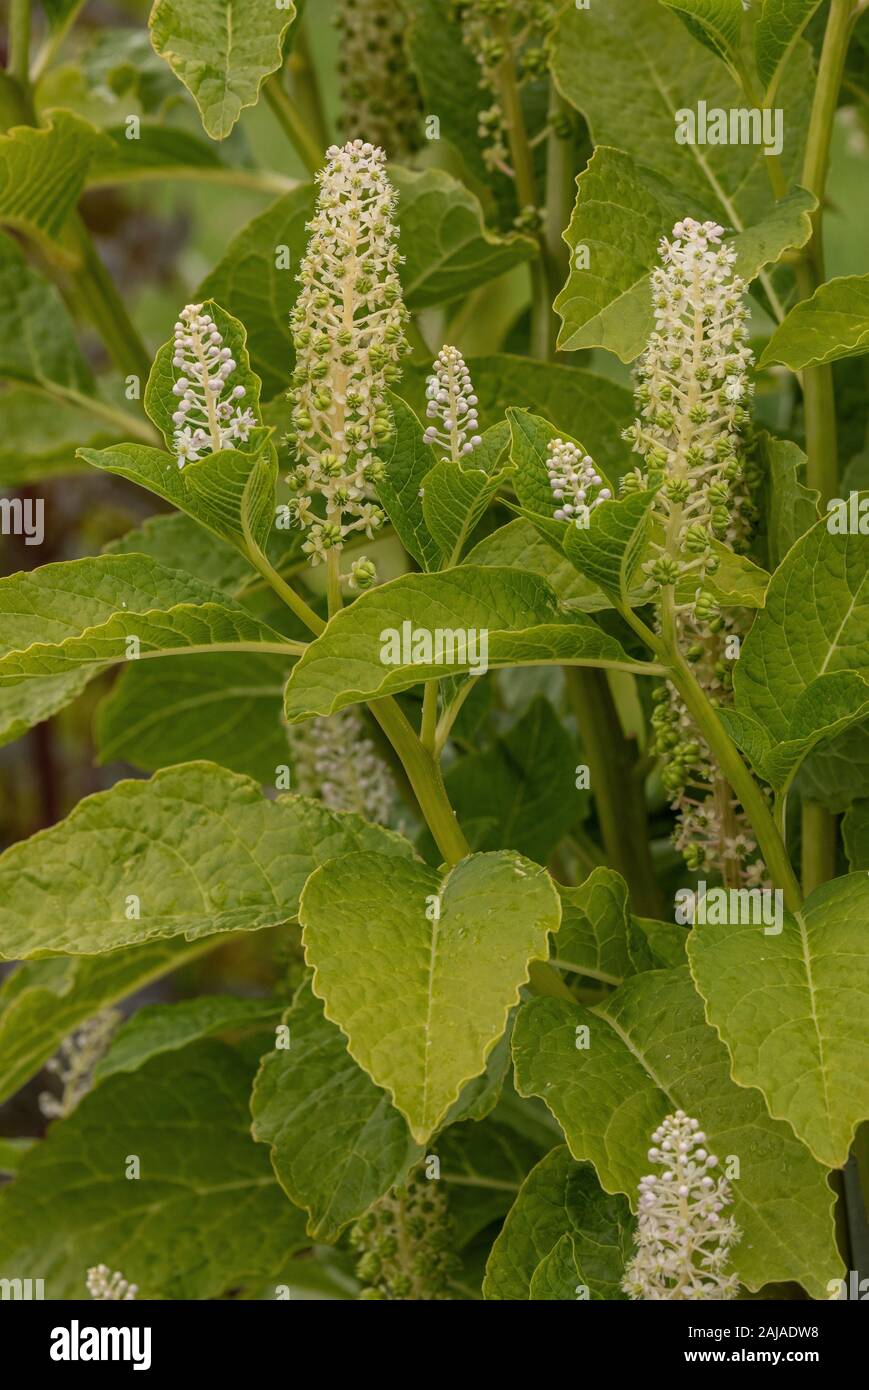 Indian Poke, Phytolacca acinosa, in flower. Toxic and medicinal plant. Stock Photo